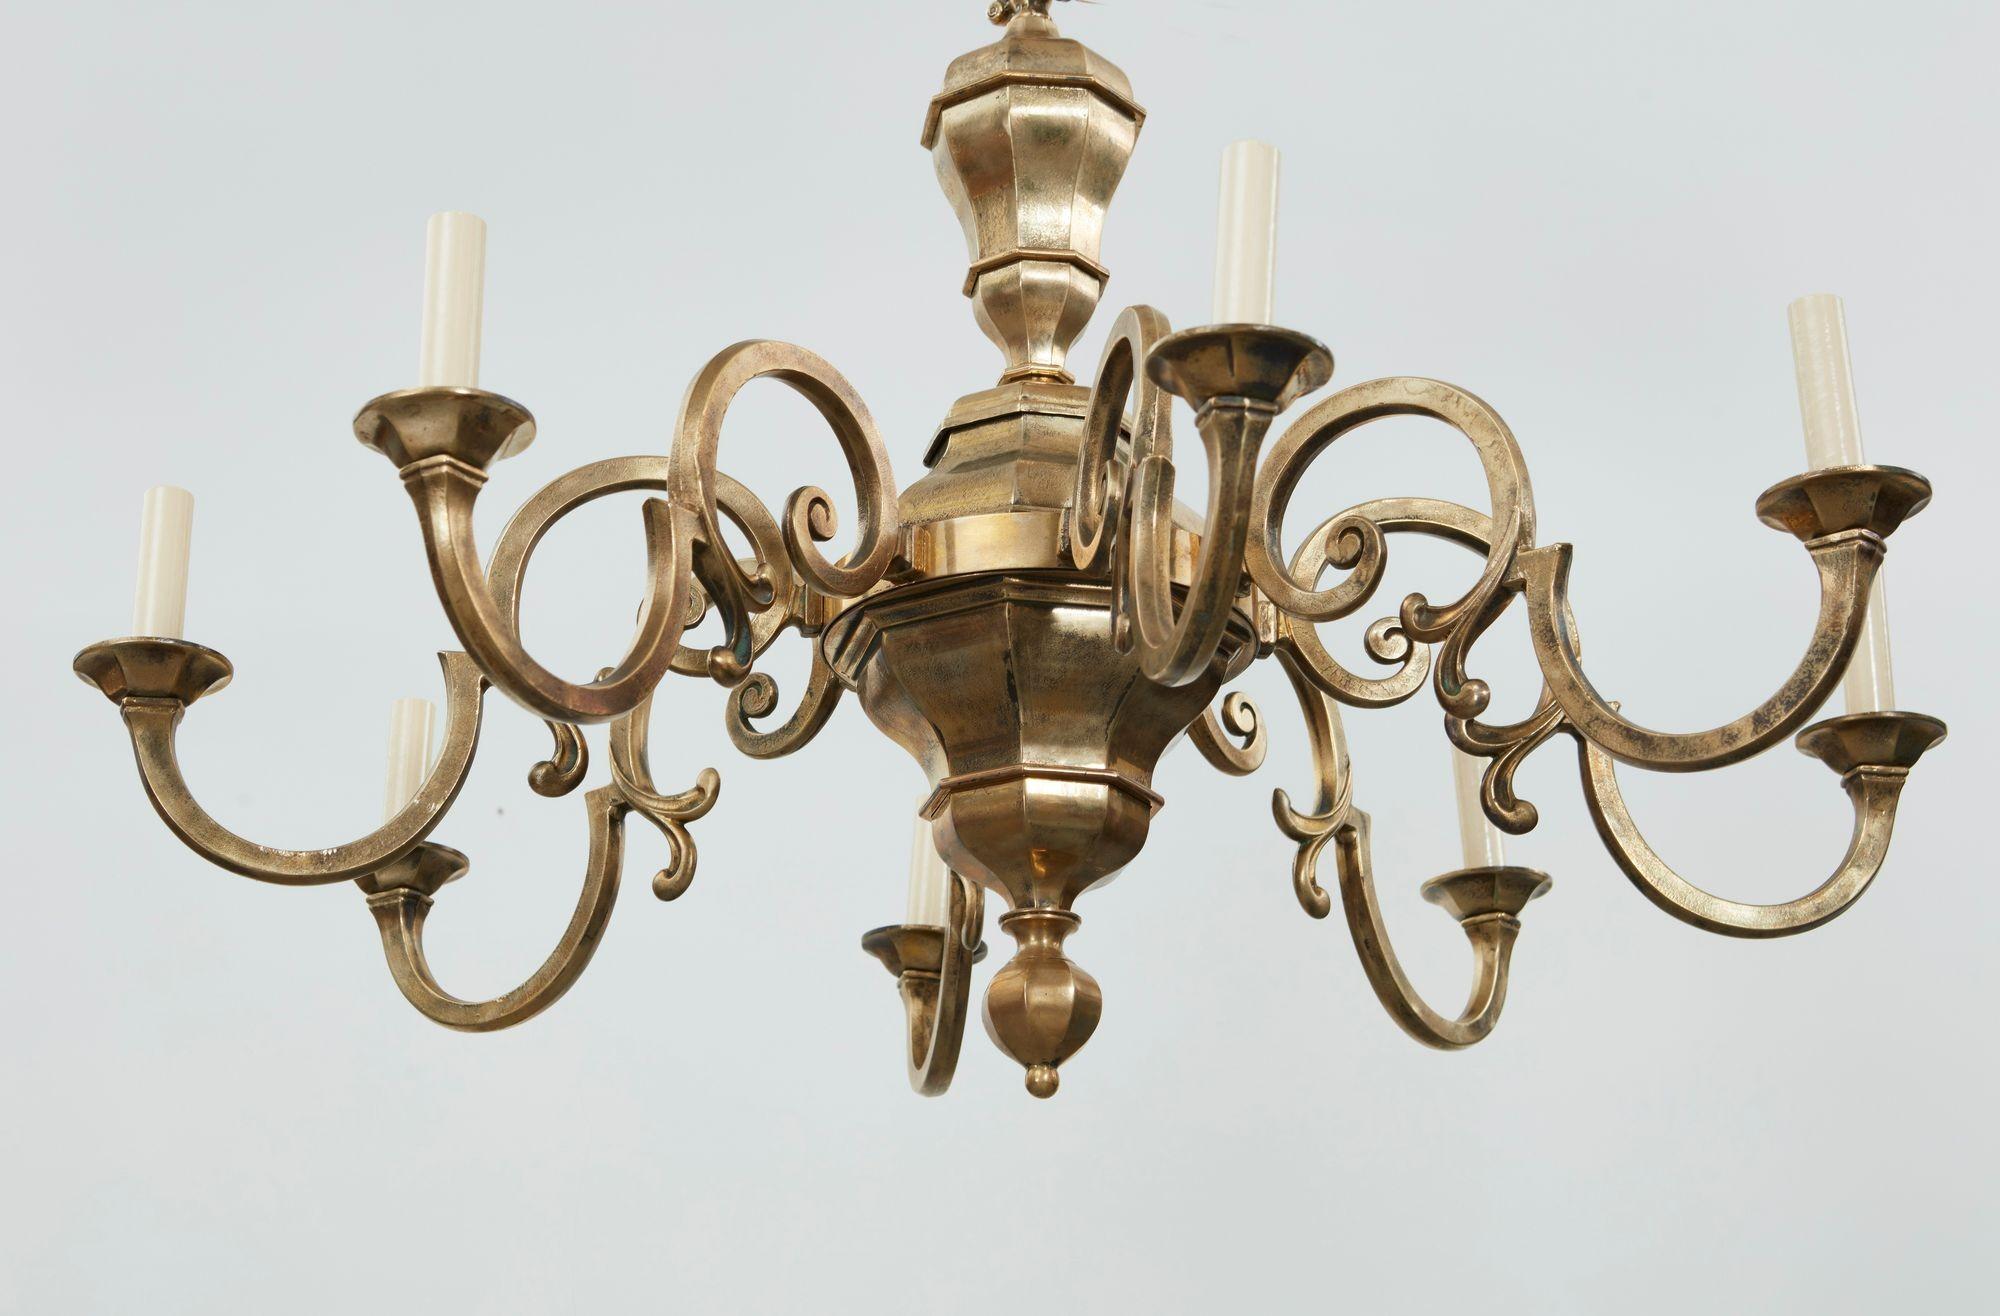 A rare pair of English country house brass chandeliers each with eight S-shaped faceted arms on elegant faceted bodies with conforming ceiling roses.  Good scale.  Now electrified.